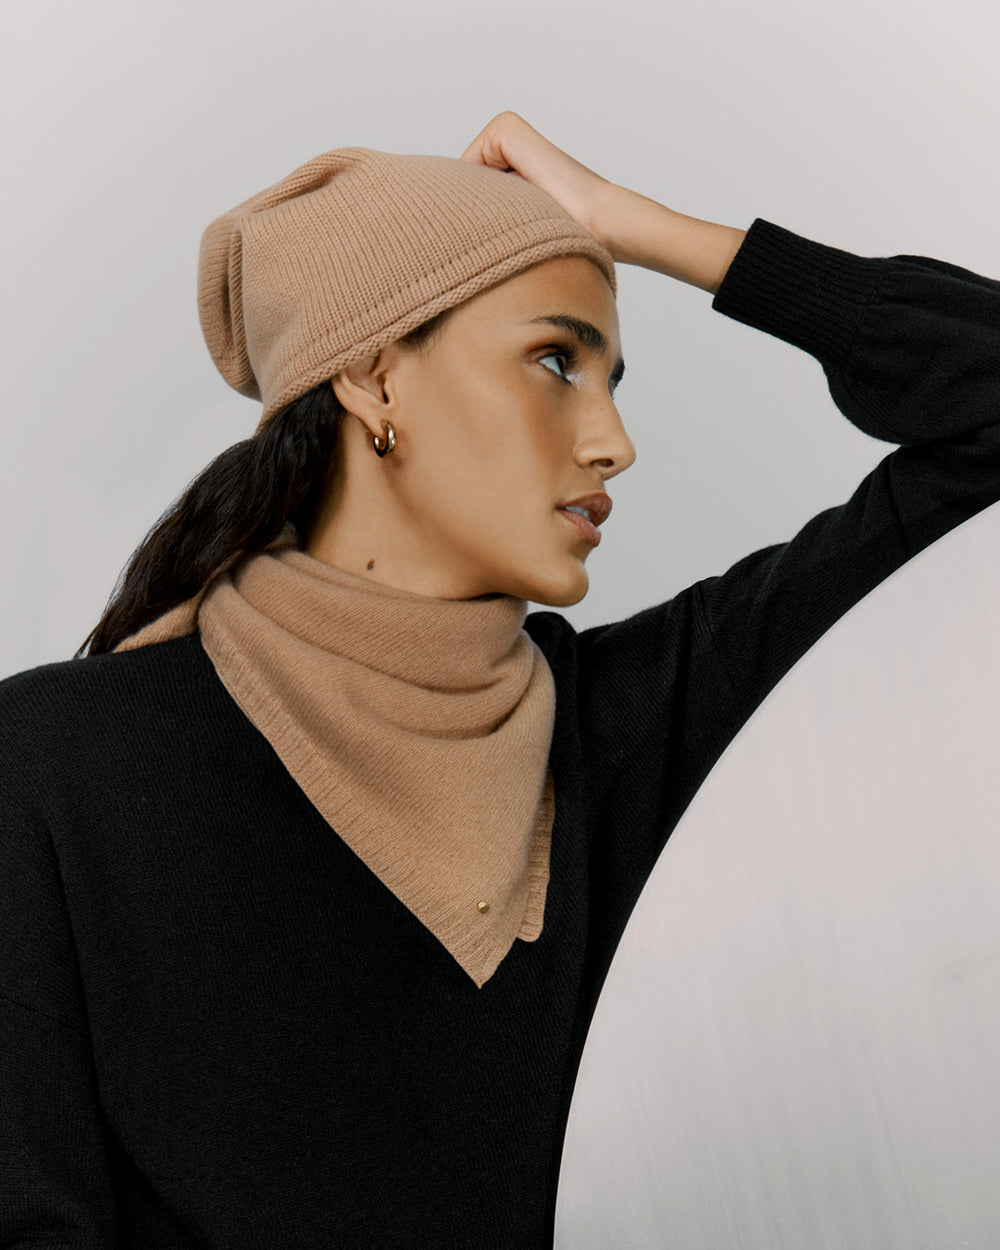 Woman in a beanie and turtleneck holding her hat looking to the side.